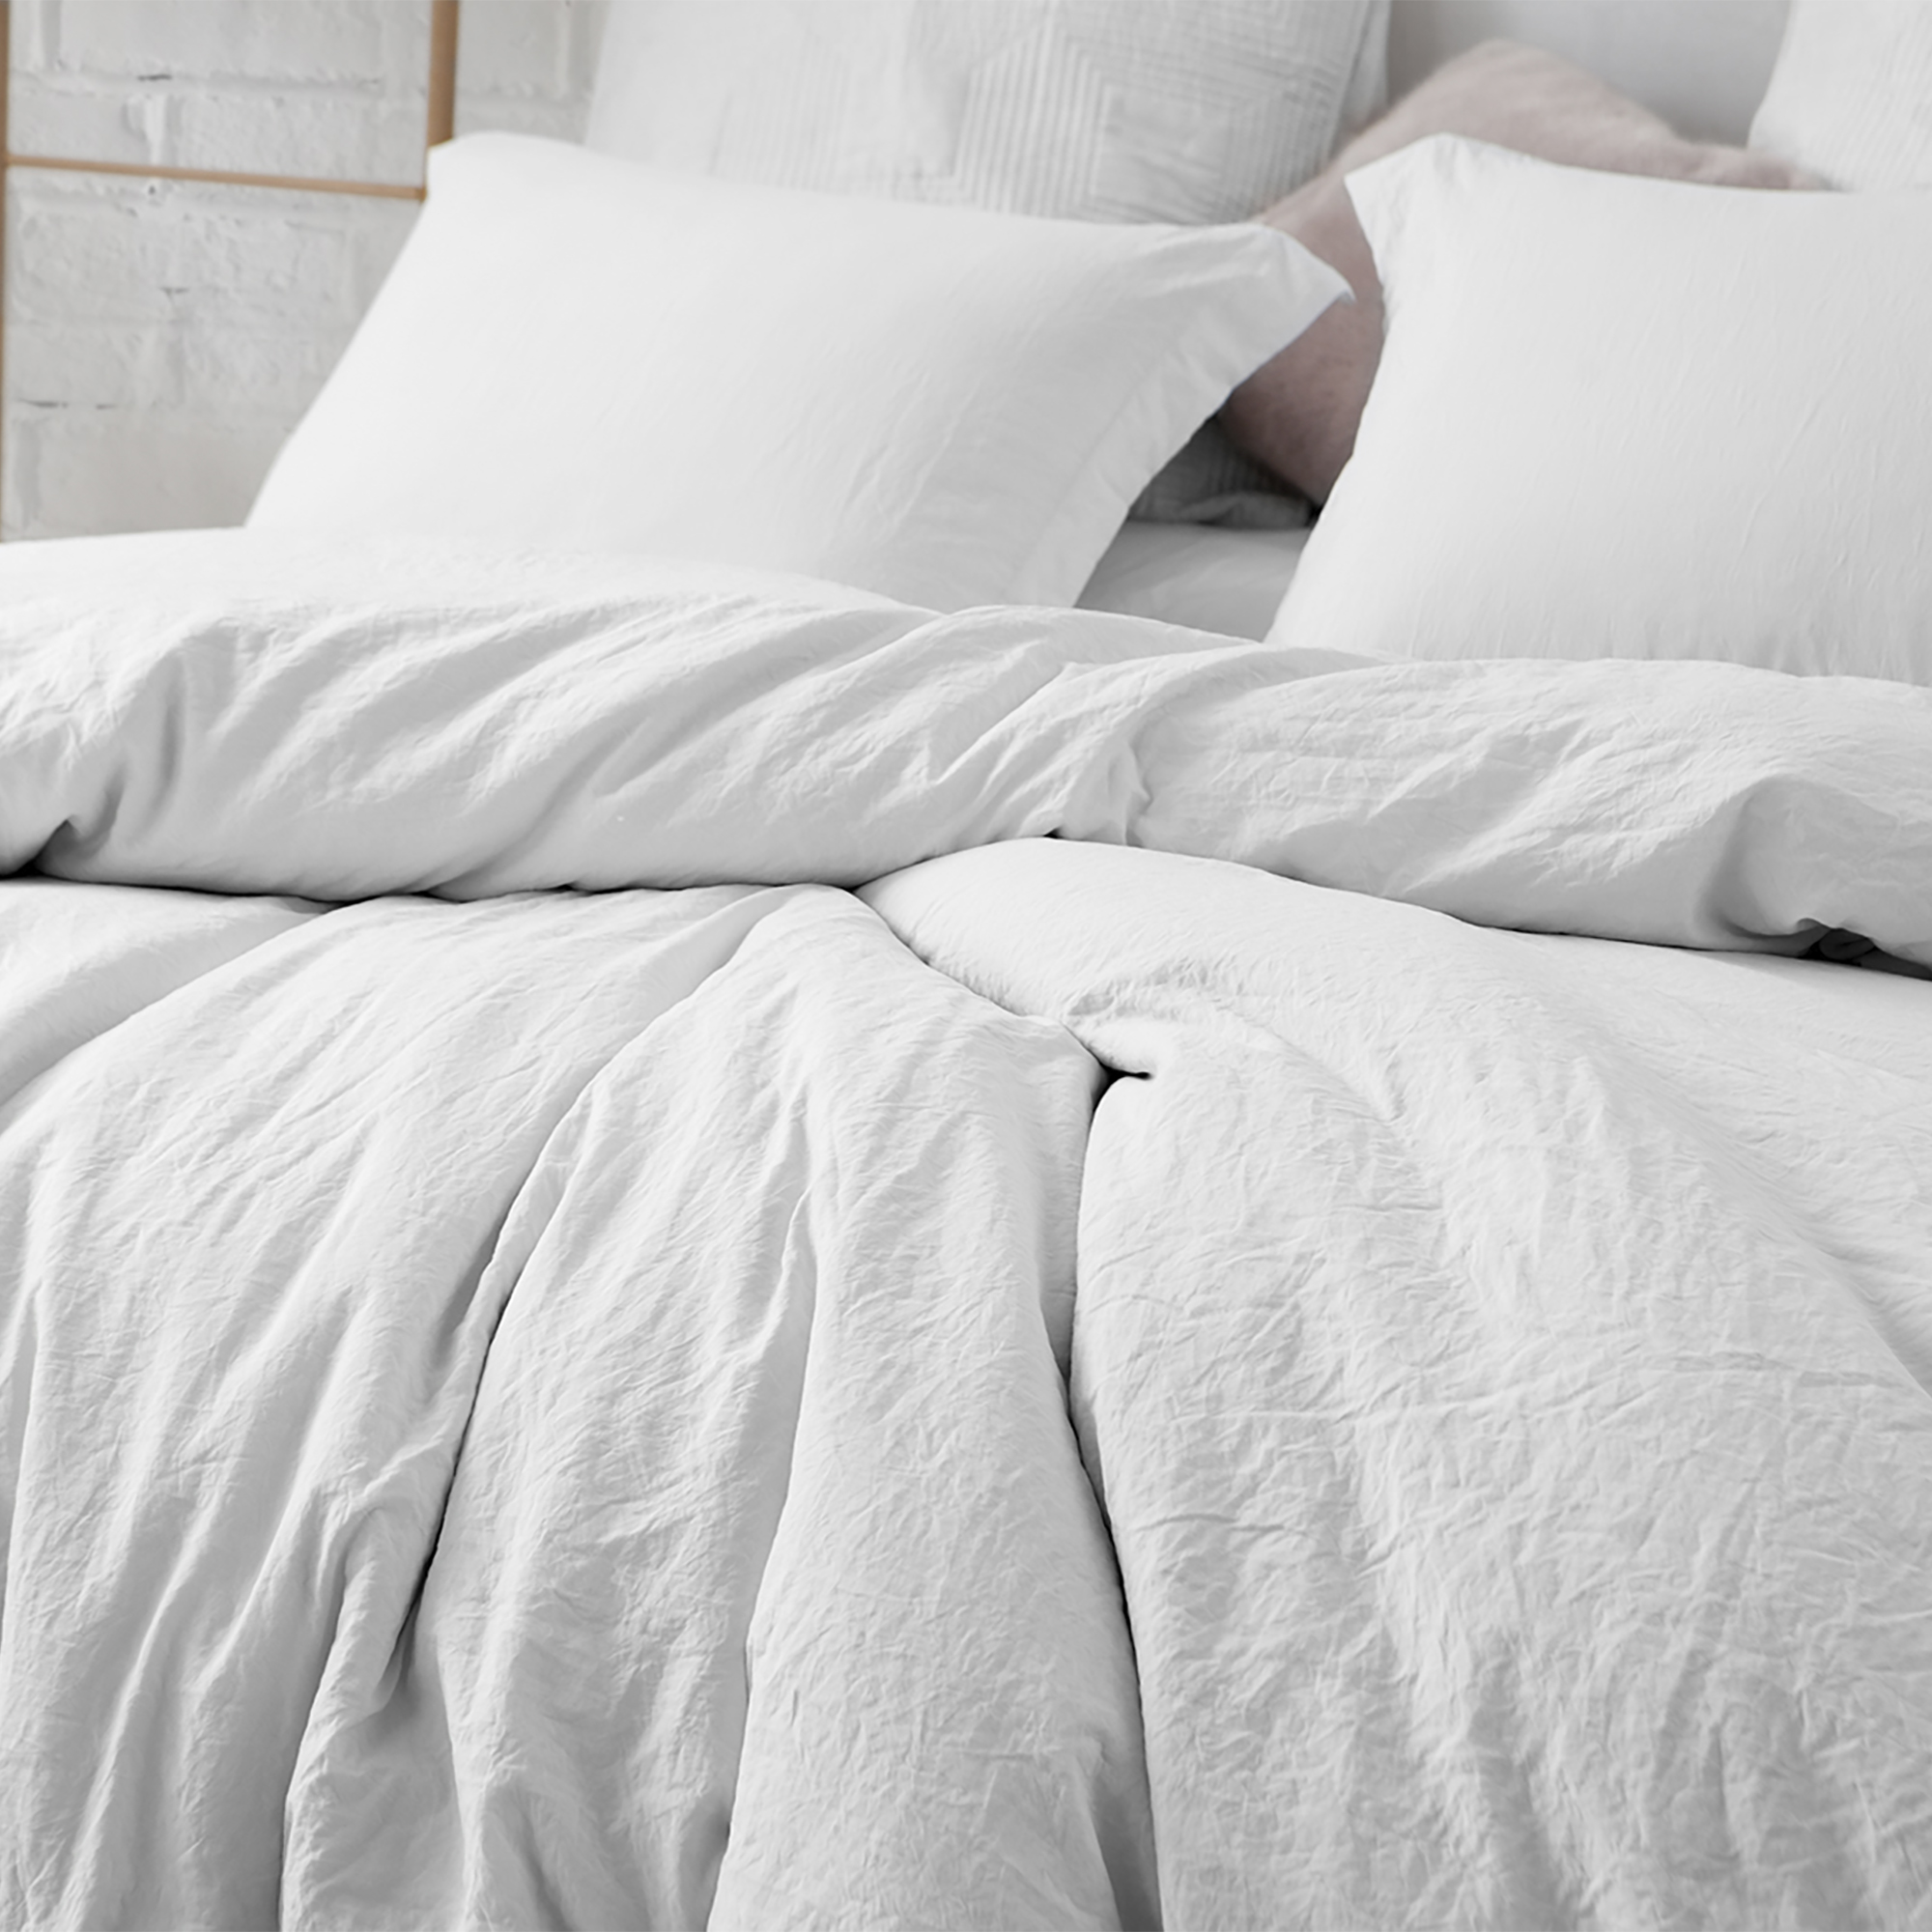 Ultra Thick Oversized King XL Bedding Stylish Farmhouse White Comfy King  Comforter High Quality Natural Loft